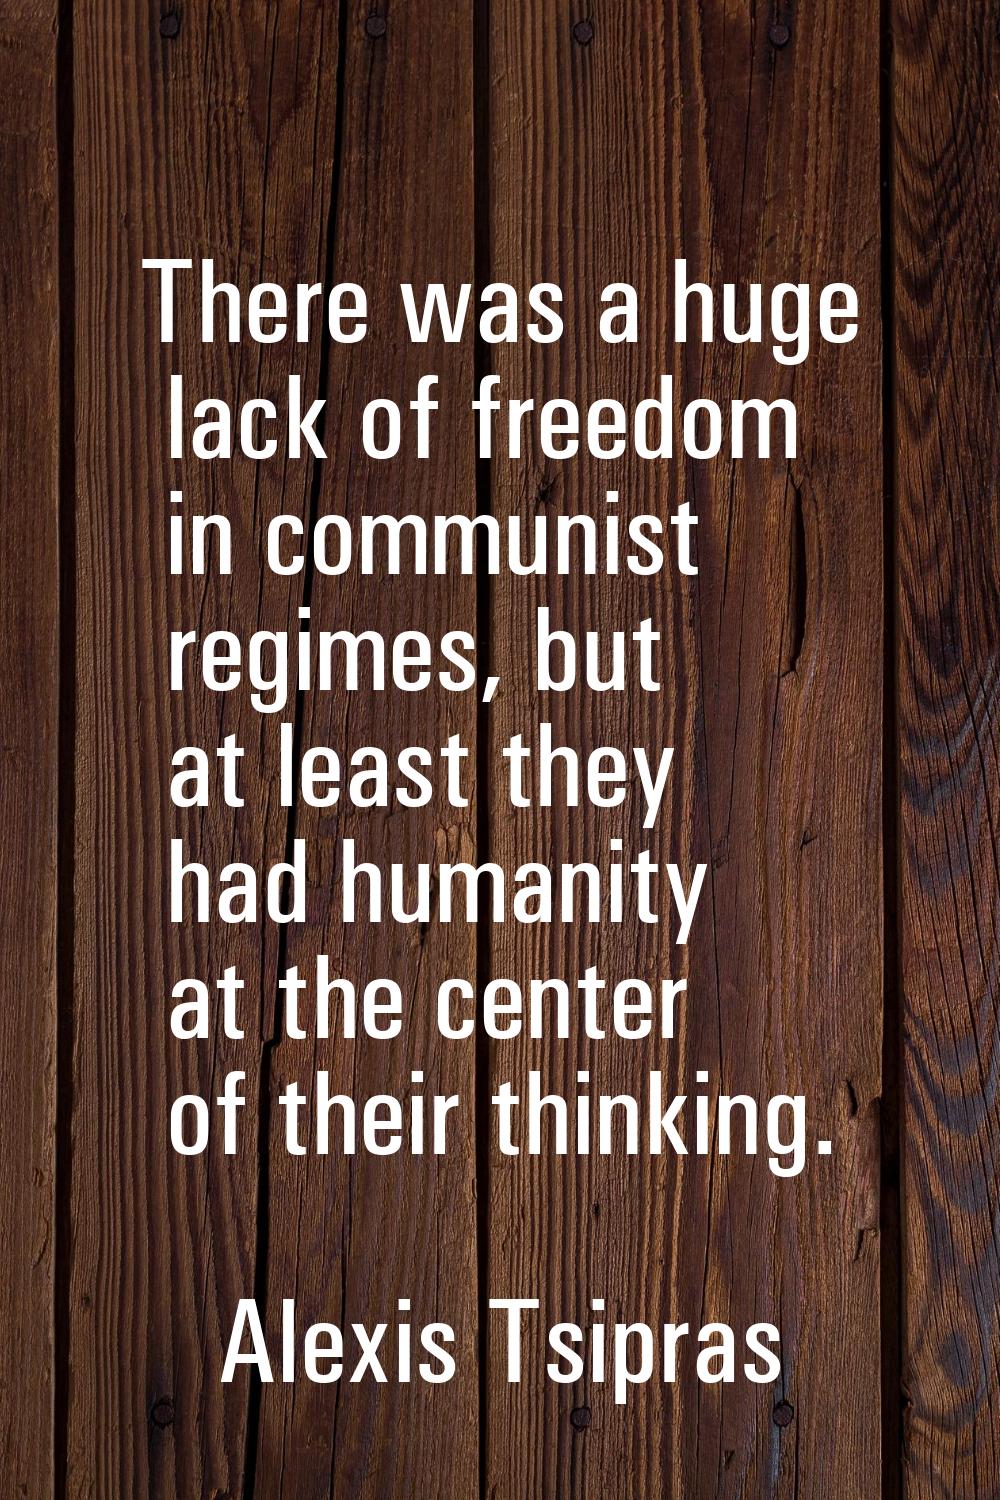 There was a huge lack of freedom in communist regimes, but at least they had humanity at the center